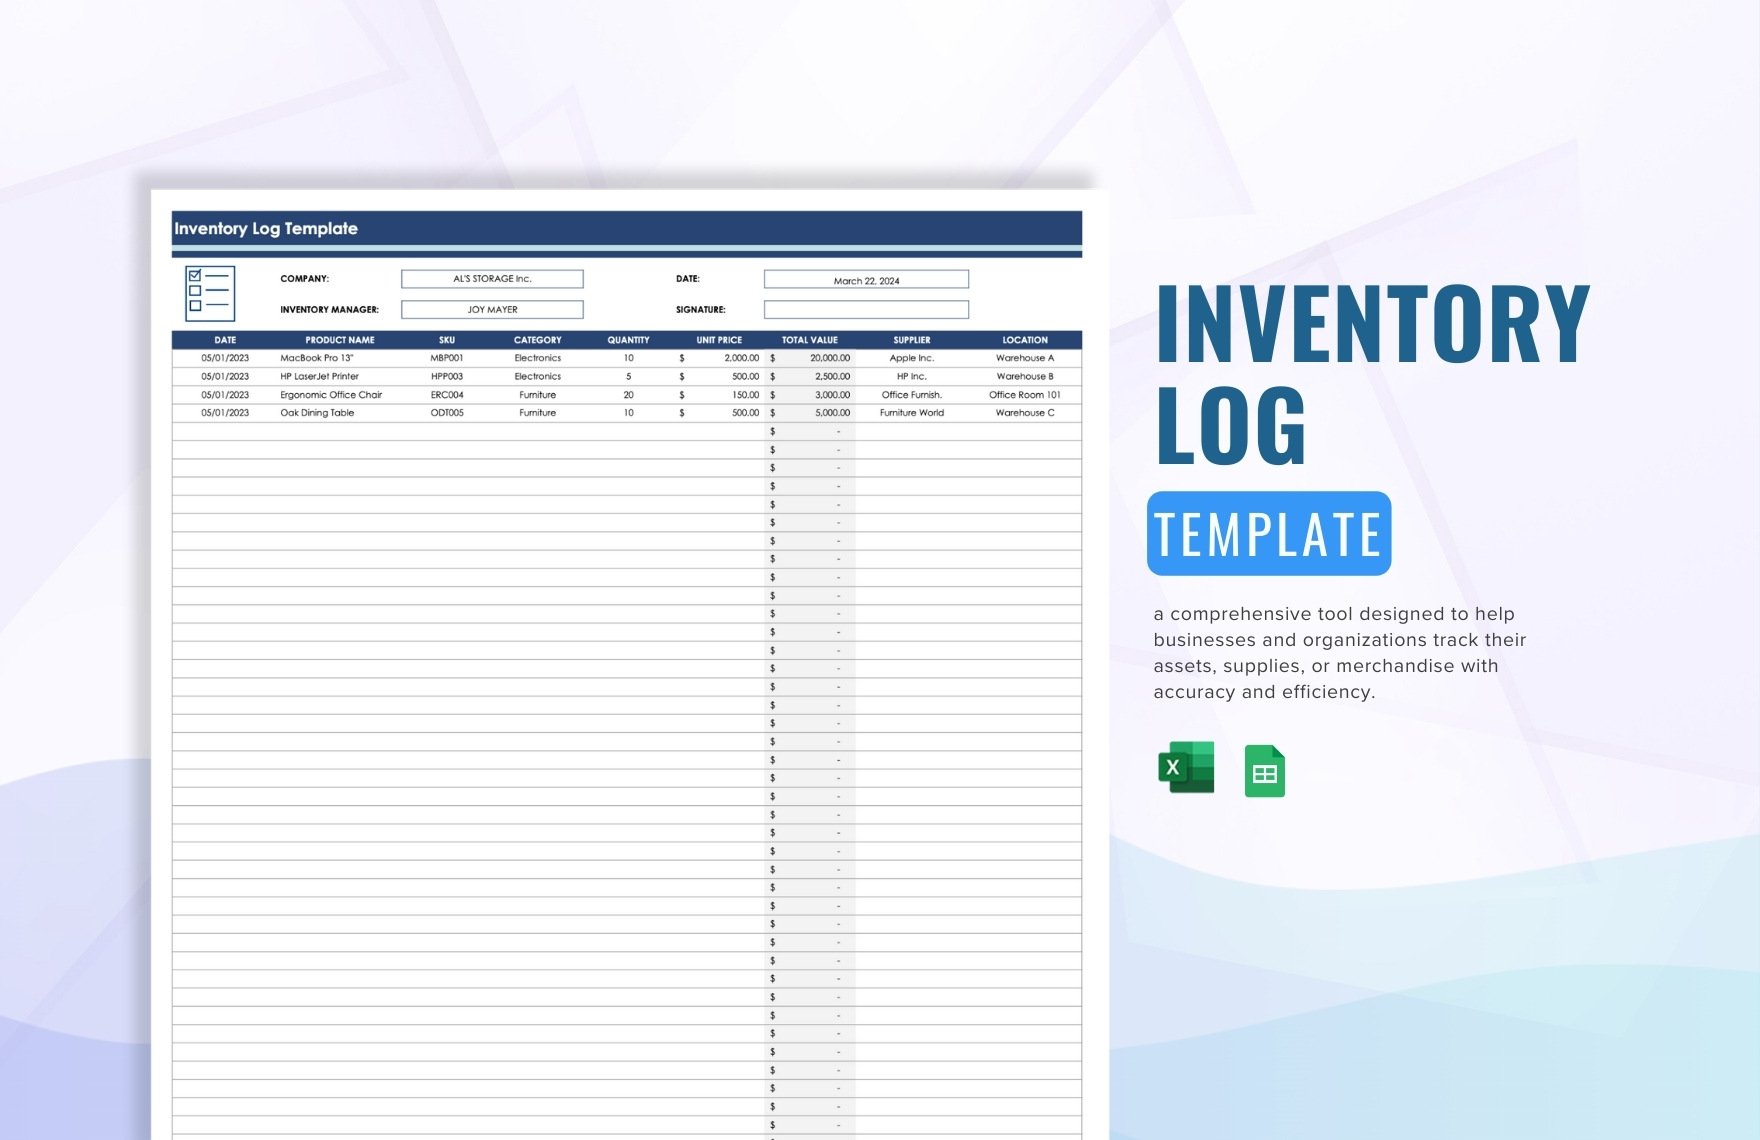 Inventory Log Template in Excel, Google Sheets